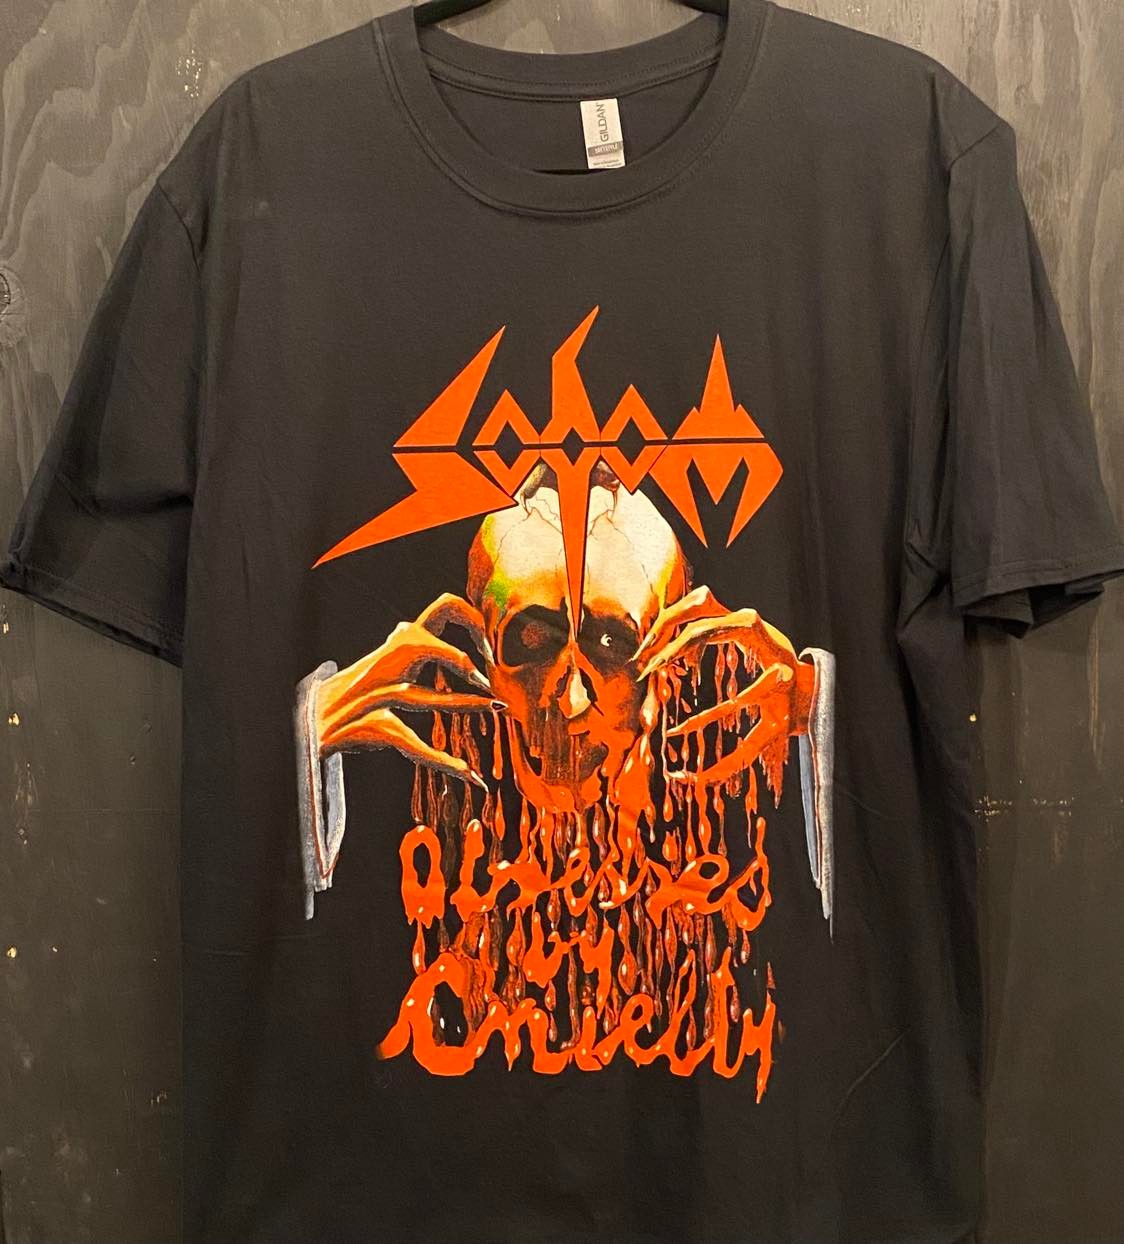 SODOM | obsessed by cruelty t-shirt